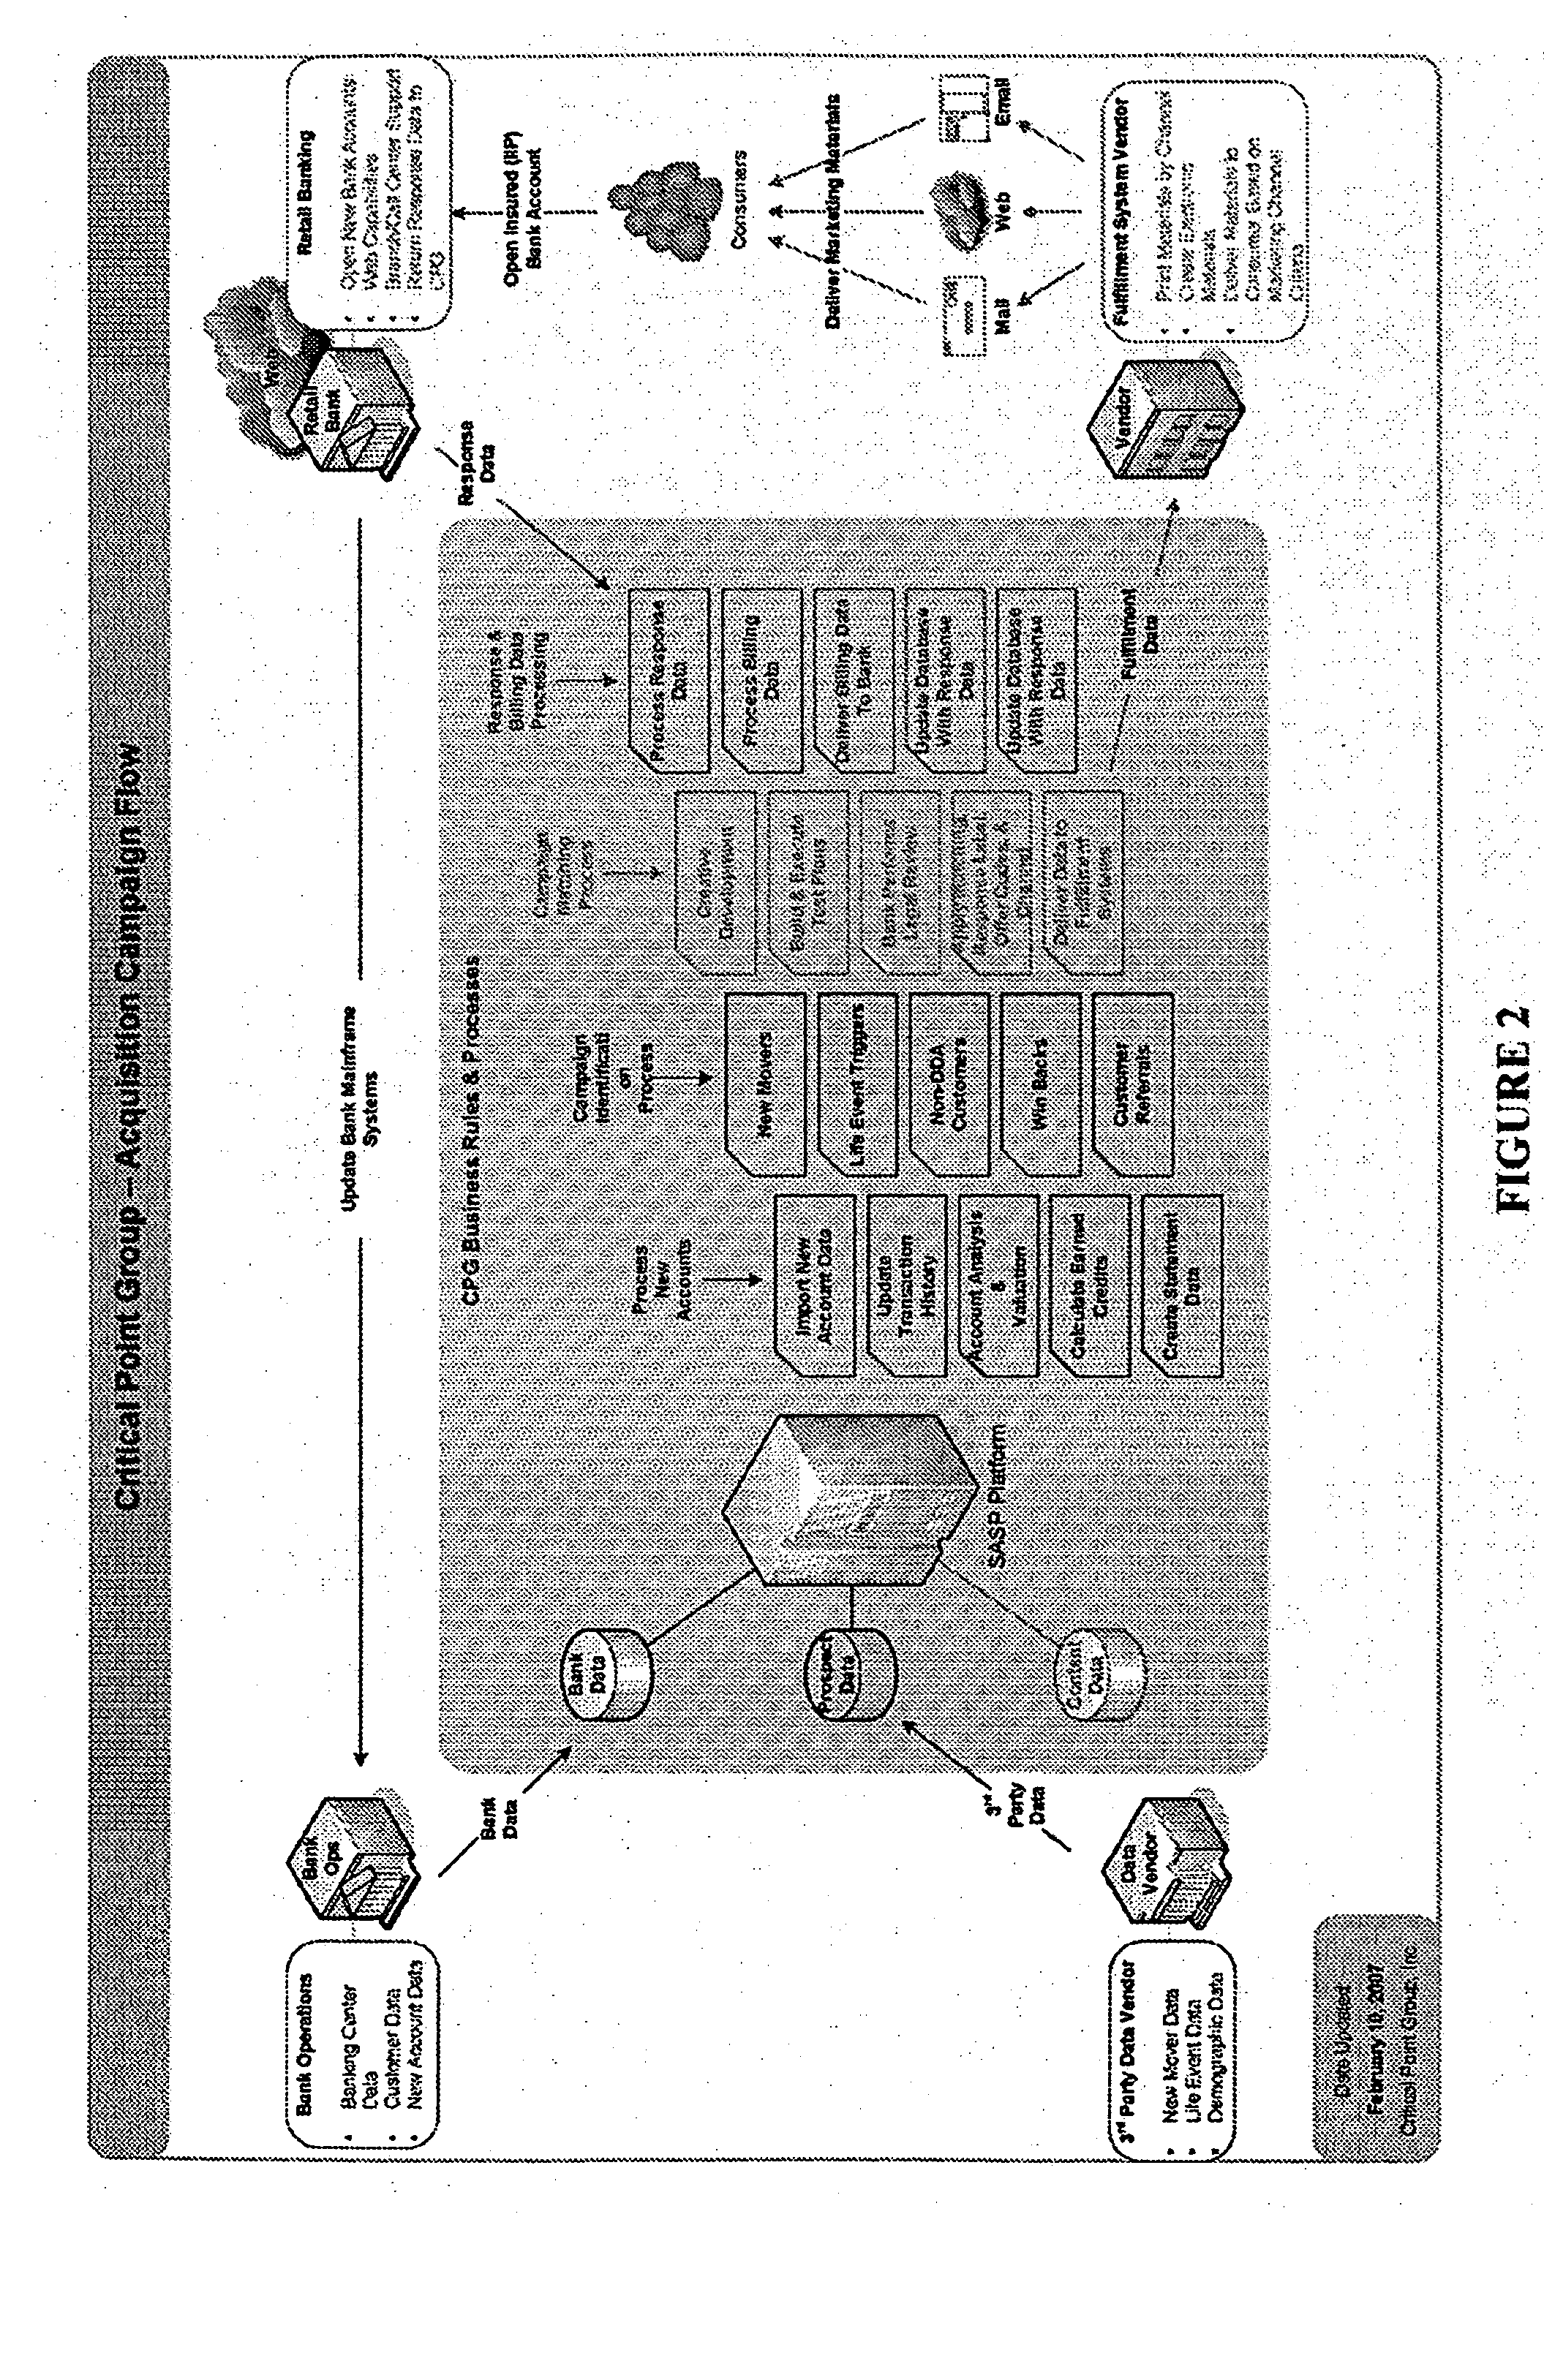 Apparatus, System, and Method for Delivering Products or Services